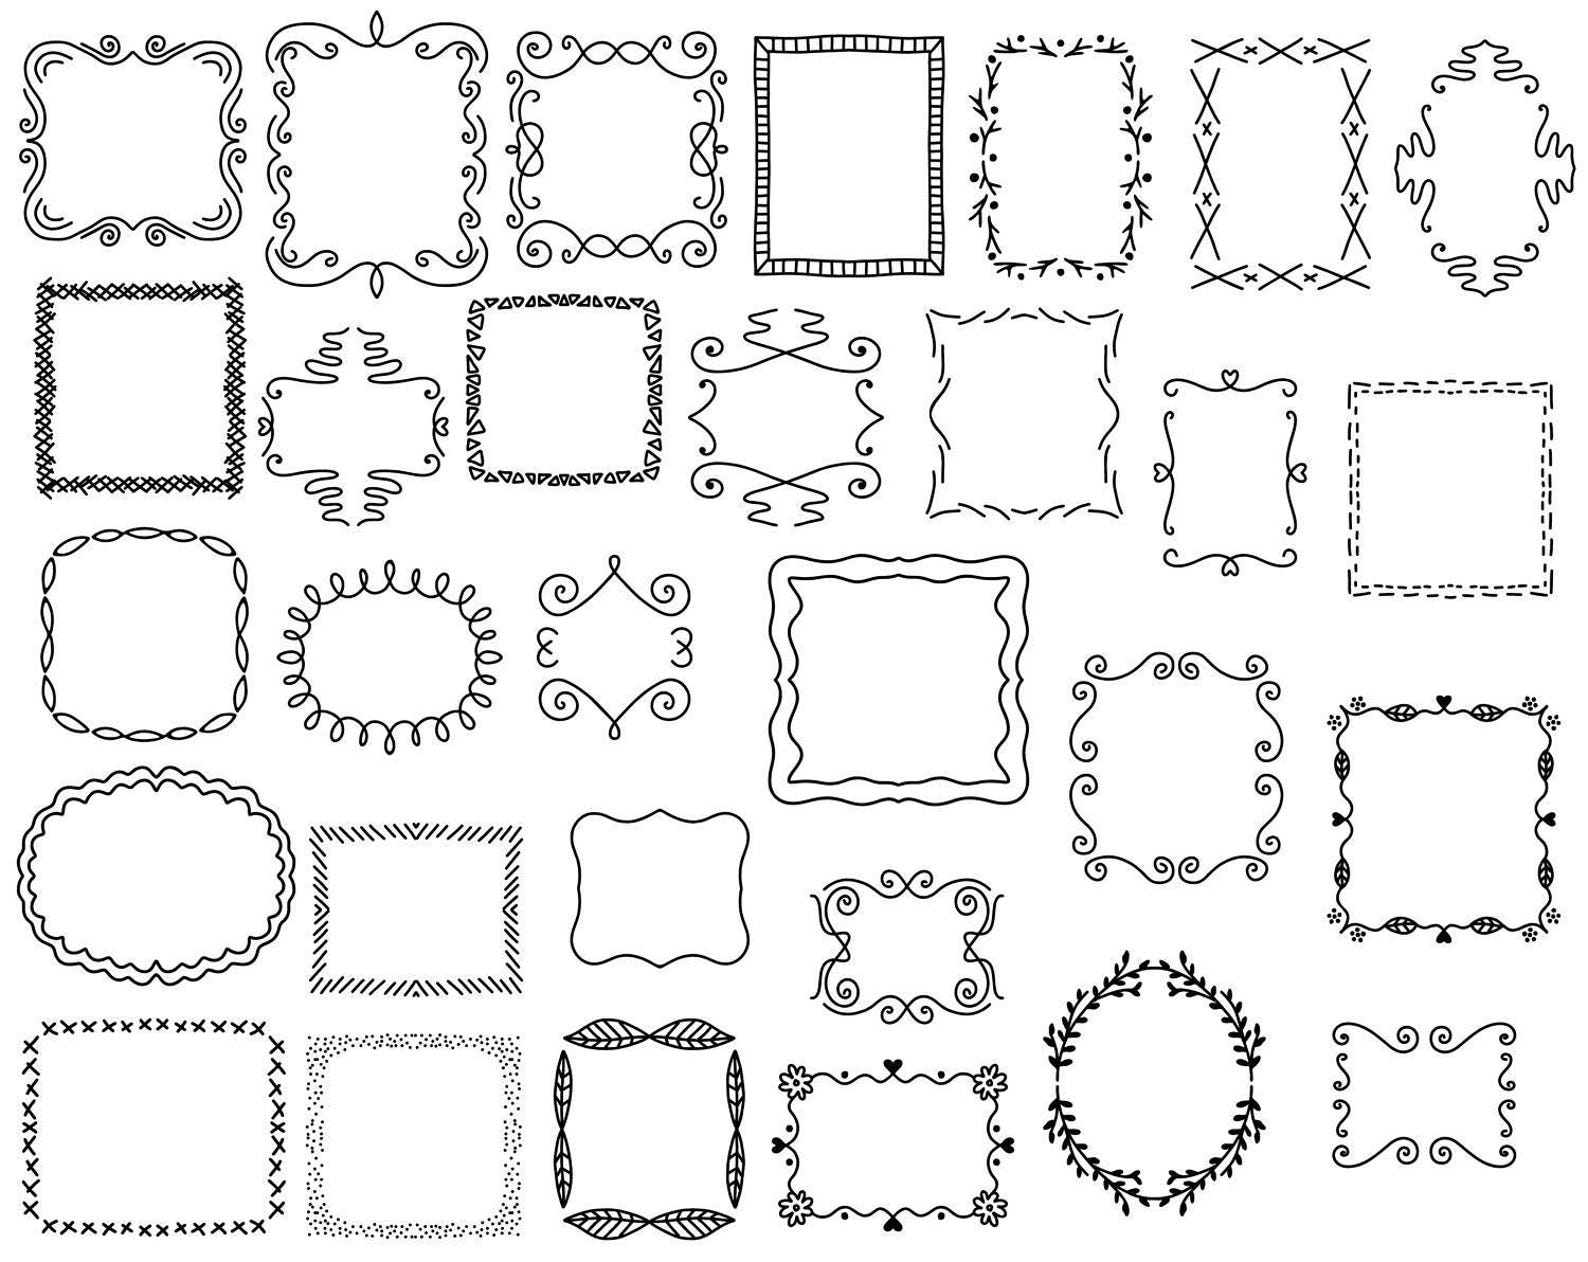 30-doodle-frames-vector-pack-hand-drawn-doodle-clipart-hand-drawn